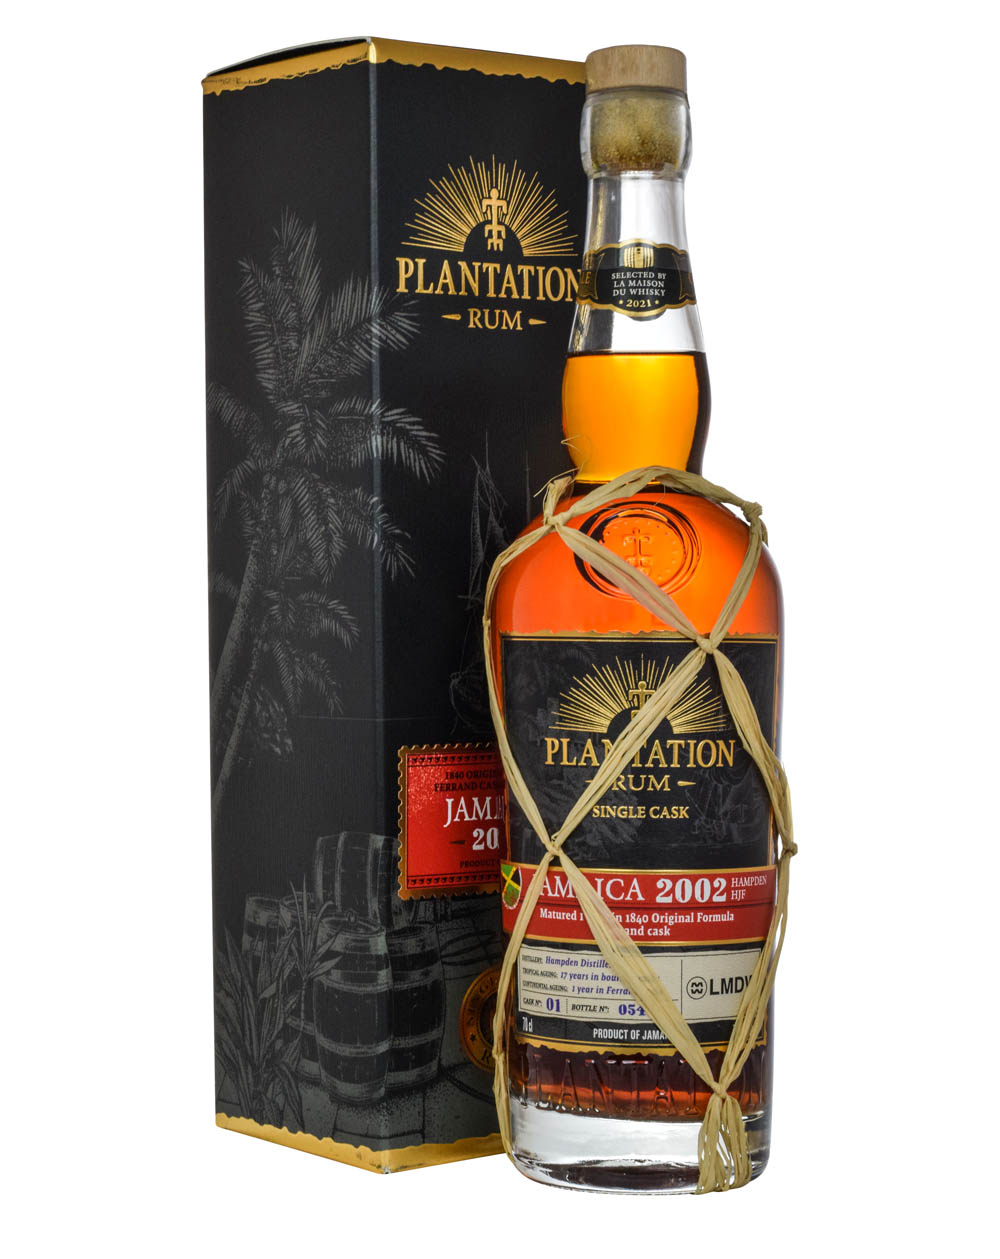 Hampden Plantation Rum 17 Years Old For LMDW Box Must Have Malts